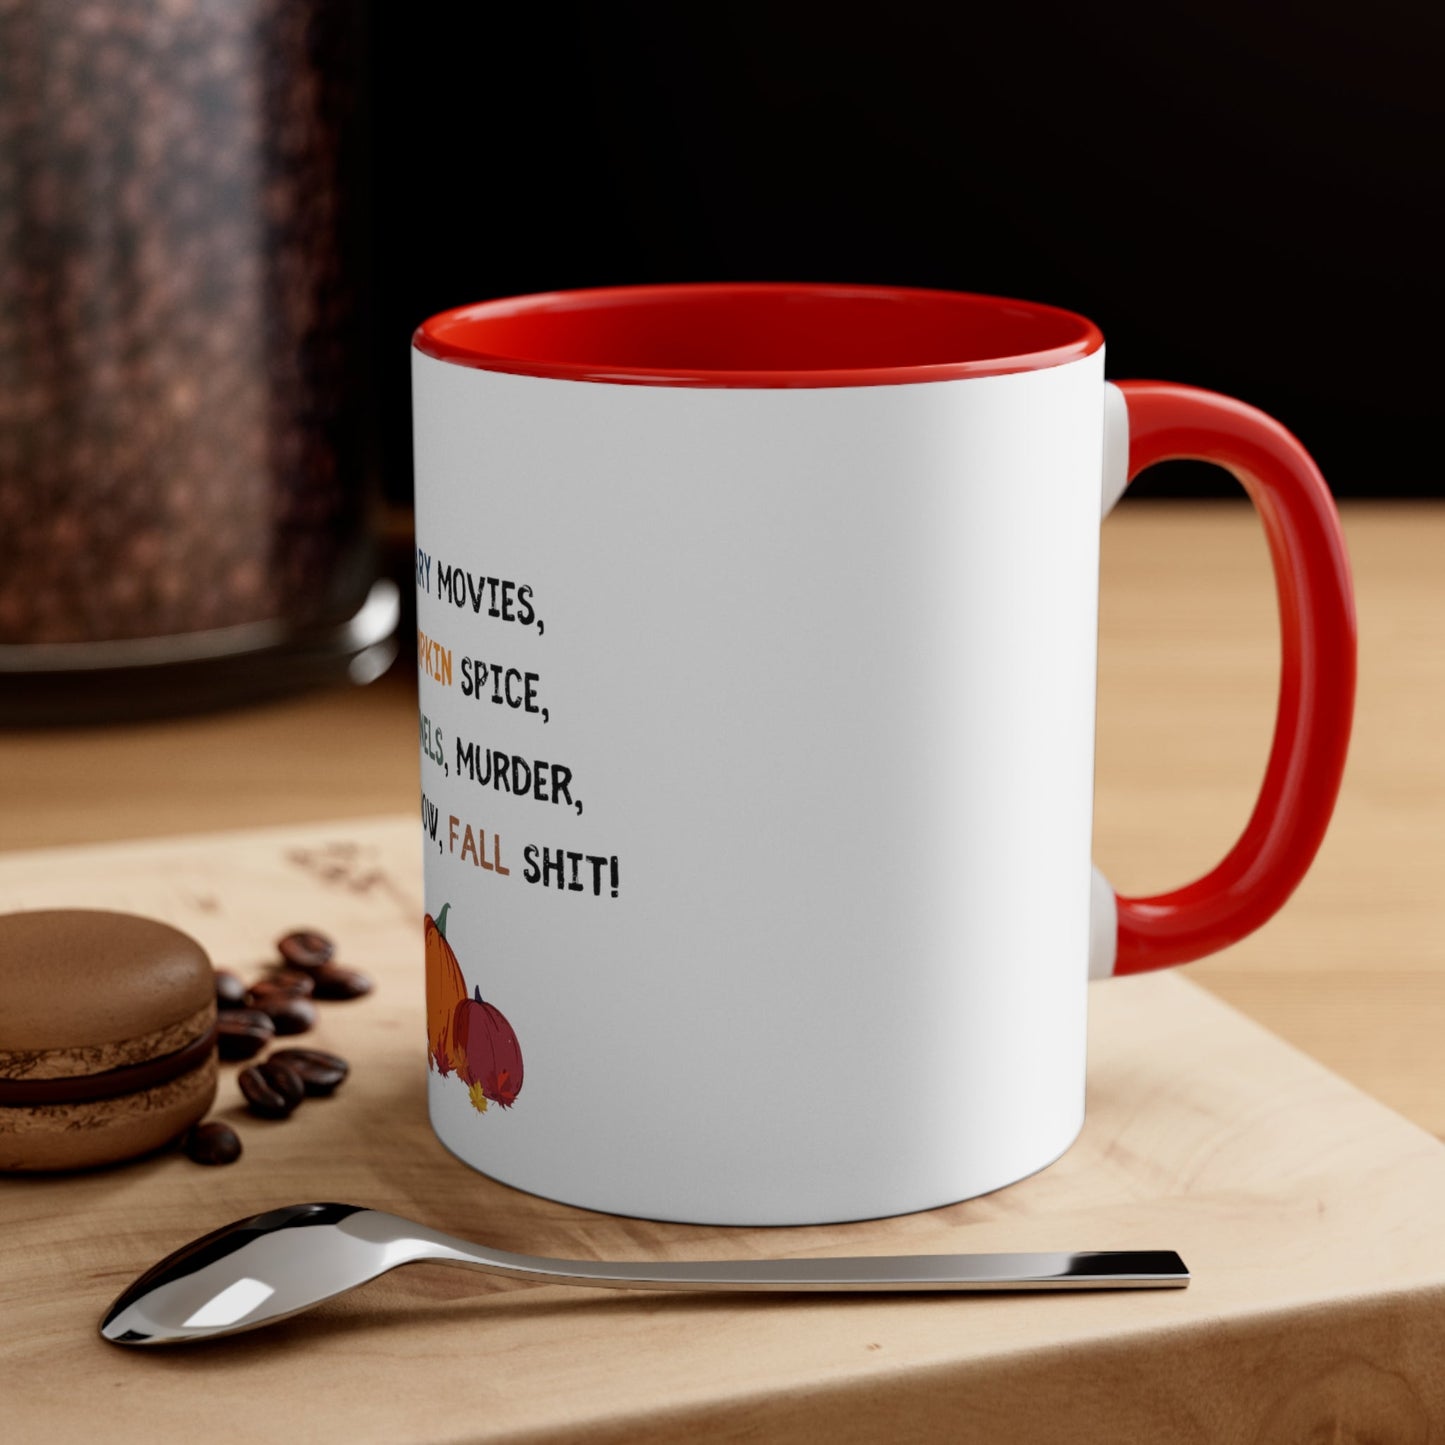 Get trendy with Fall things Coffee Mug, 11oz - Mug available at Good Gift Company. Grab yours for $10 today!